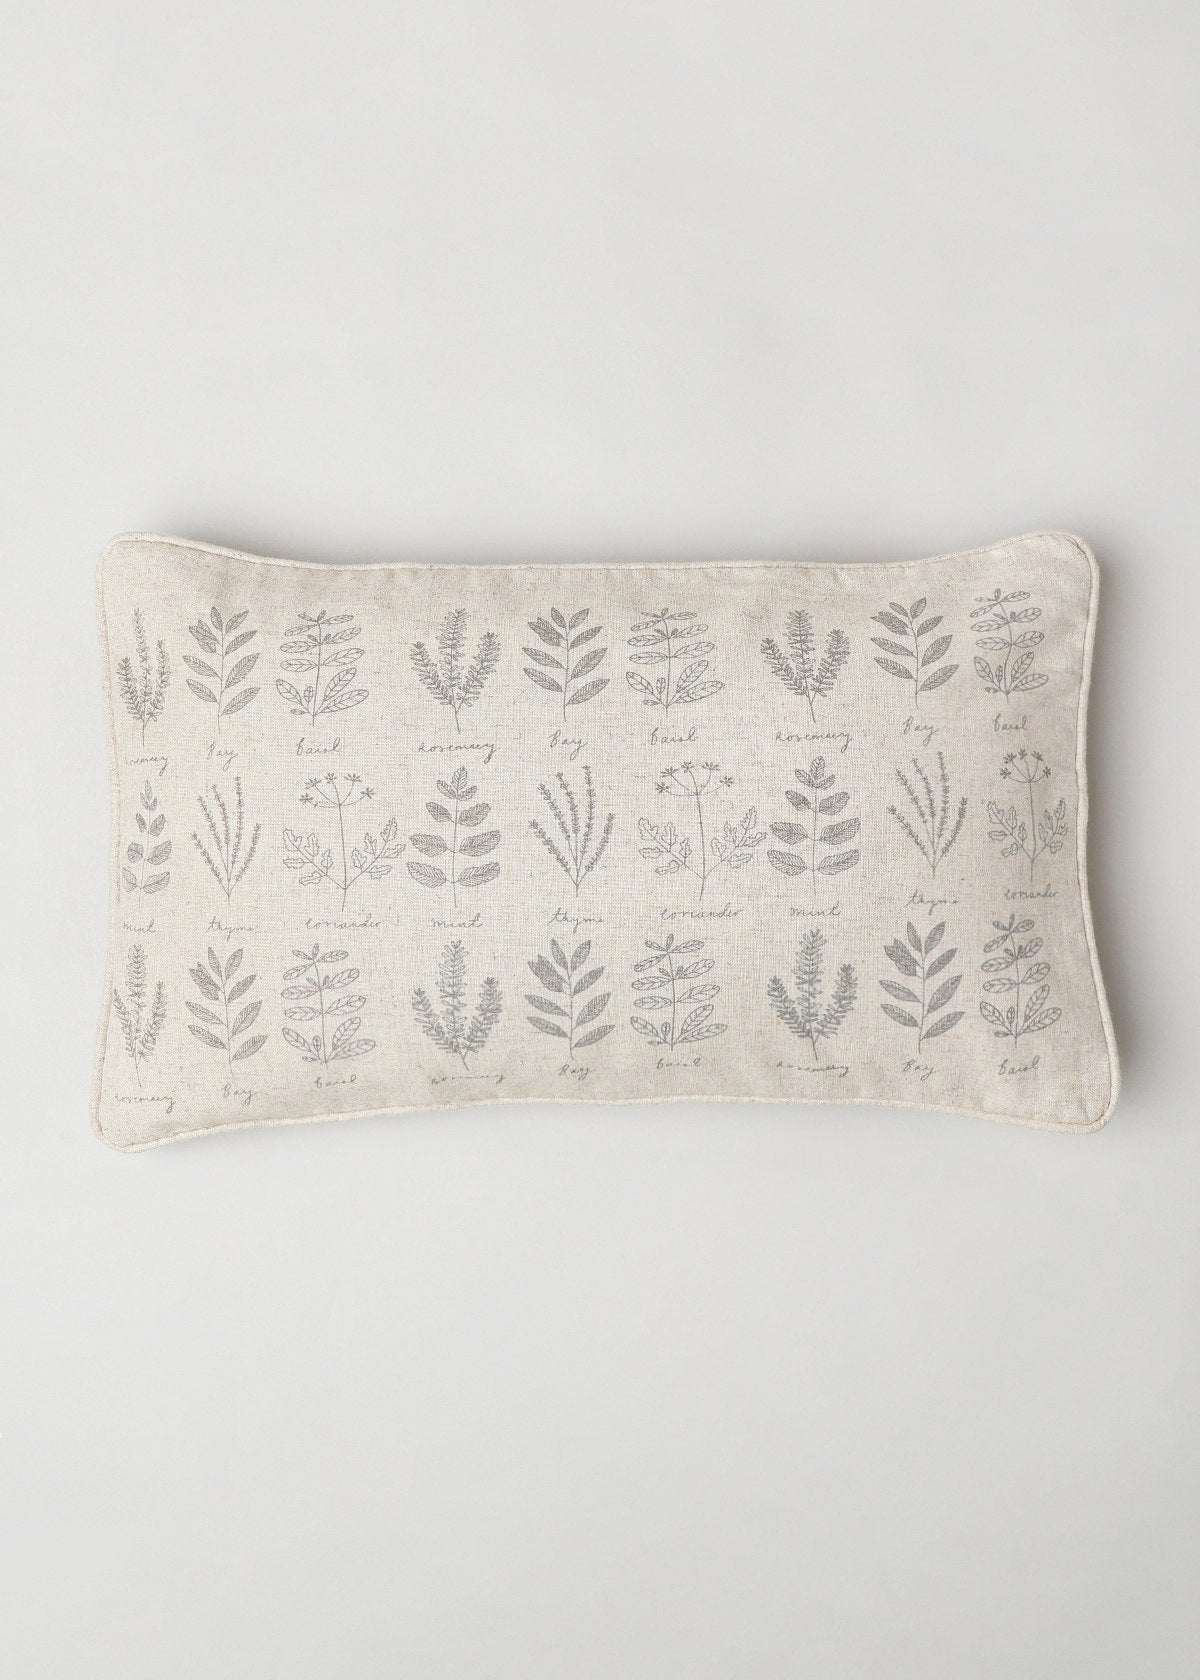 Vintage Herbs Printed Cotton Cushion Cover - Beige